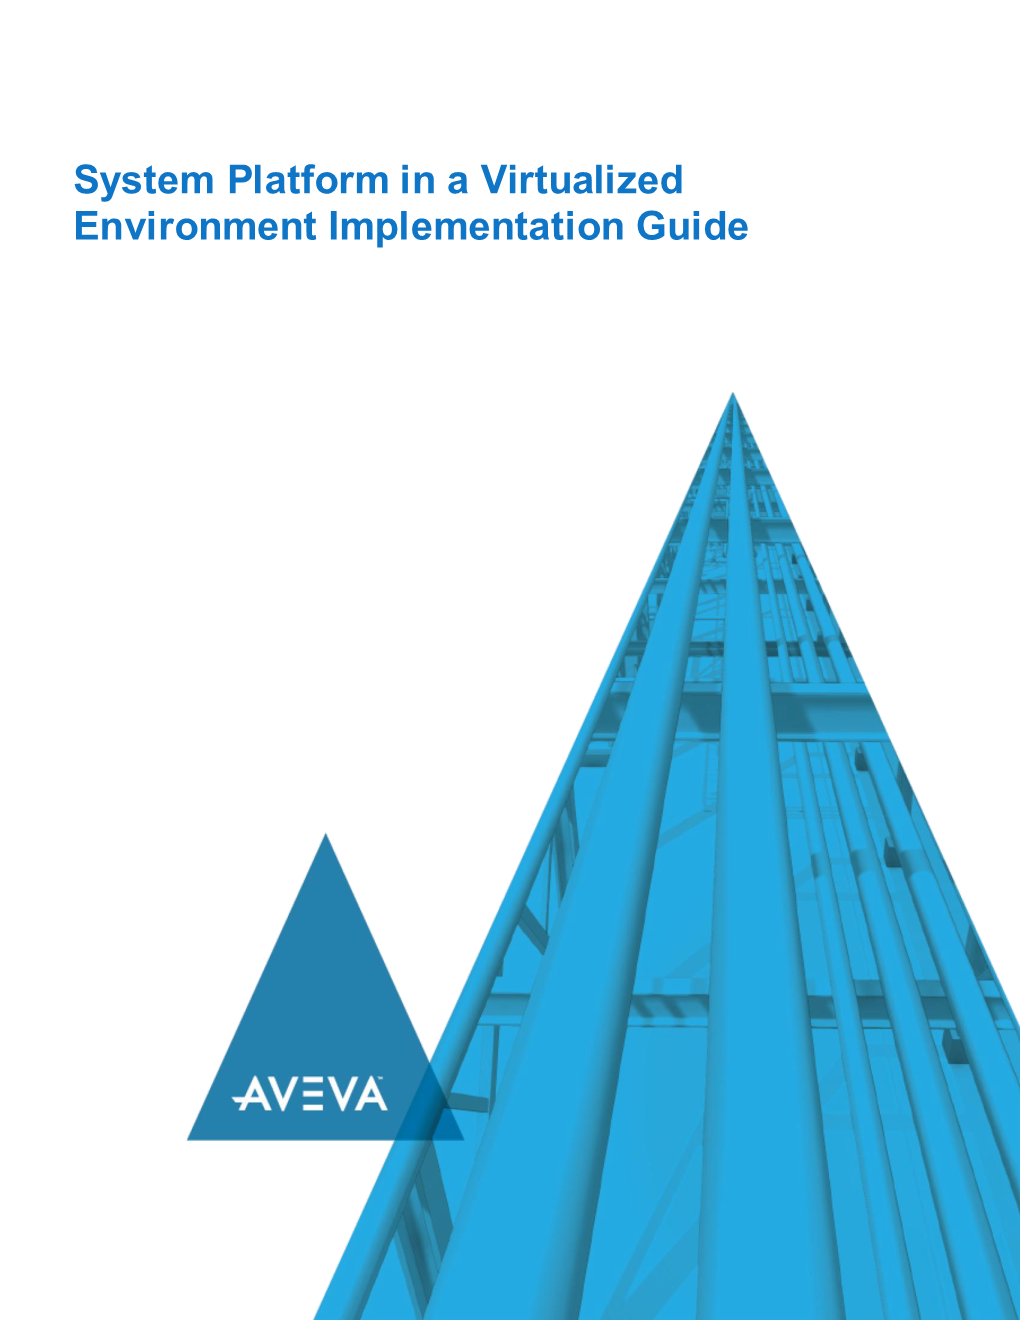 System Platform in a Virtualized Environment Implementation Guide